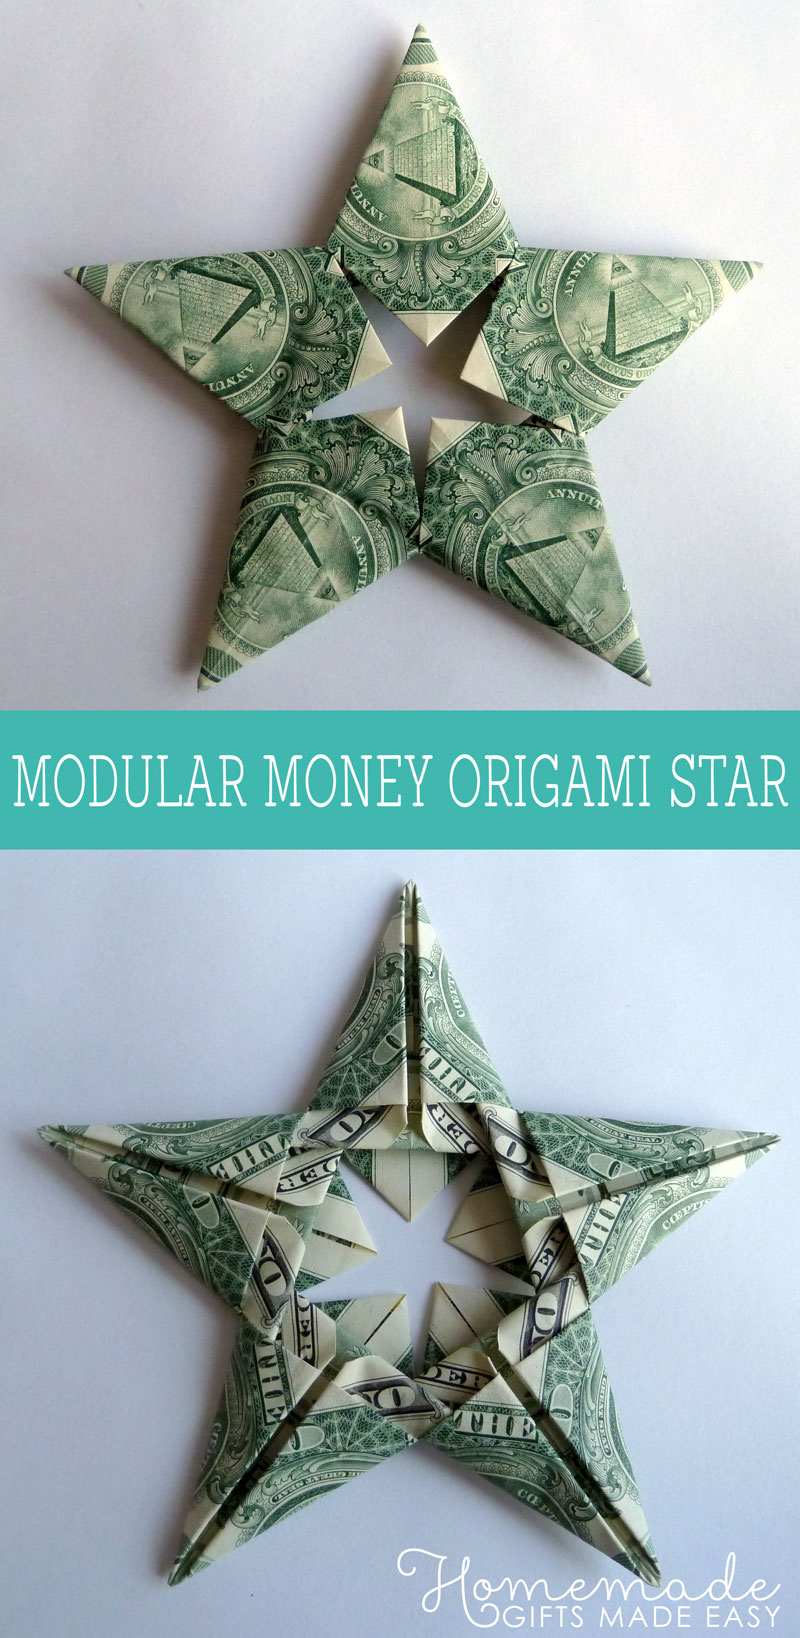 Dollar Bill Origami Butterfly Video Modular Money Origami Star From 5 Bills How To Fold Step Step